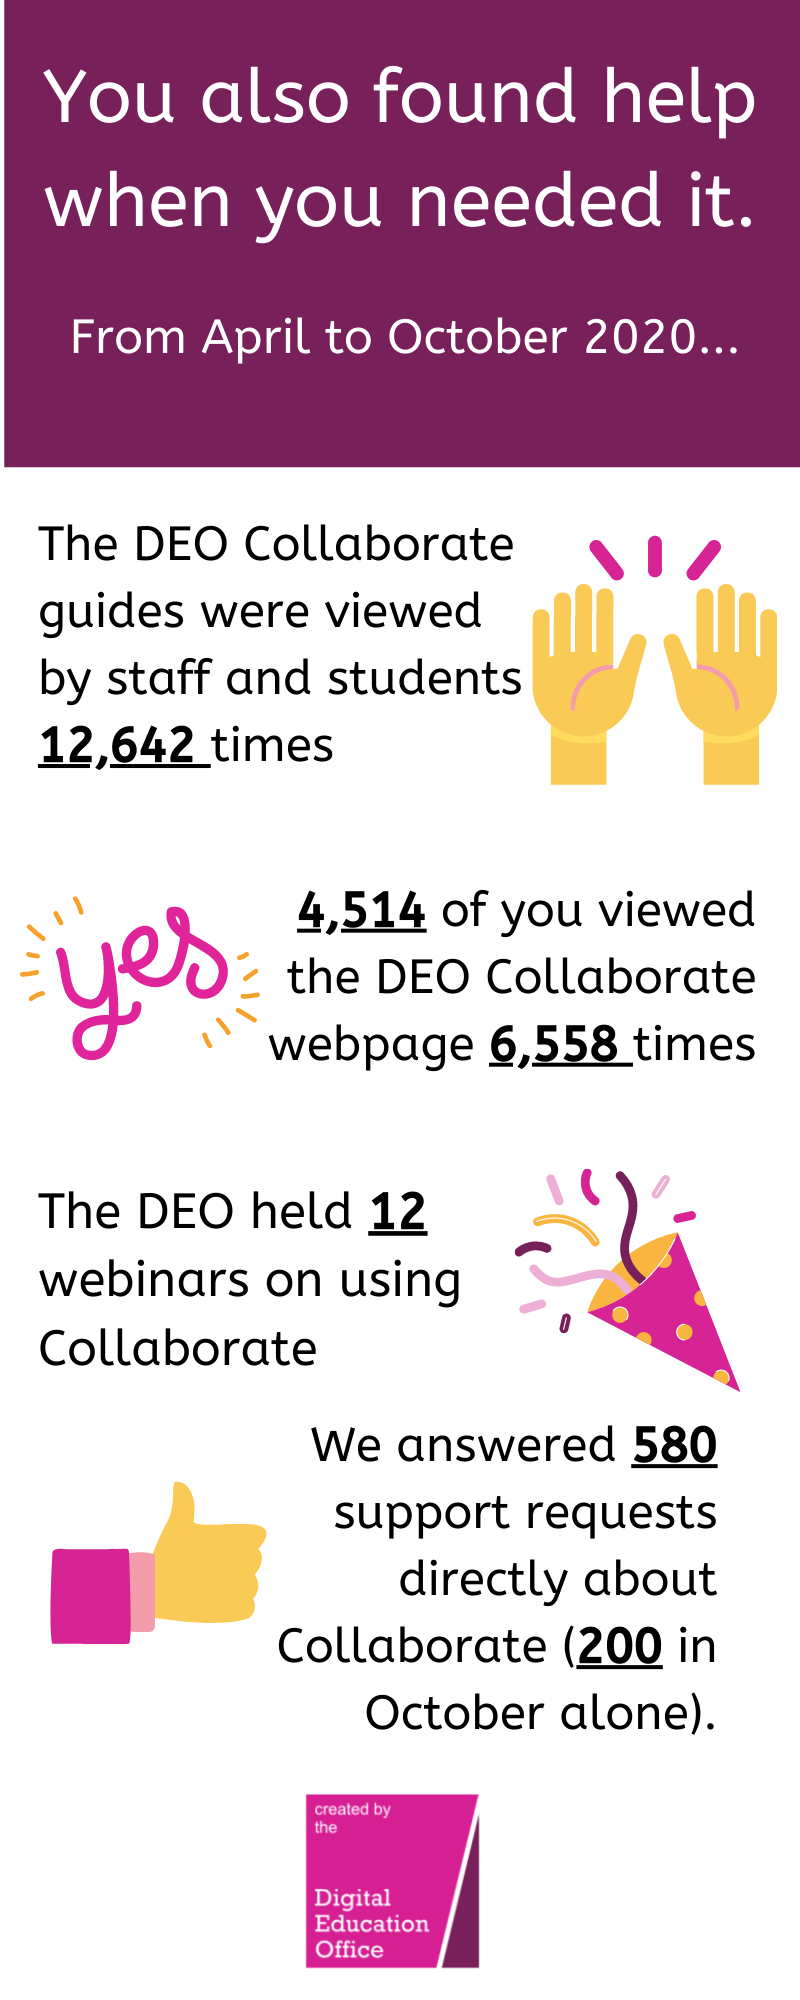 You also found help when you needed it. From April to October 2020, the DEO Collaborate guides were viewed by staff and students 12642 times. 4514 of you viewed the DEO Collaborate webpage 6558 times. The DEO held 12 webinars on using Collaborate. We answered 580 support requests directly about Collaborate (200 in October alone).